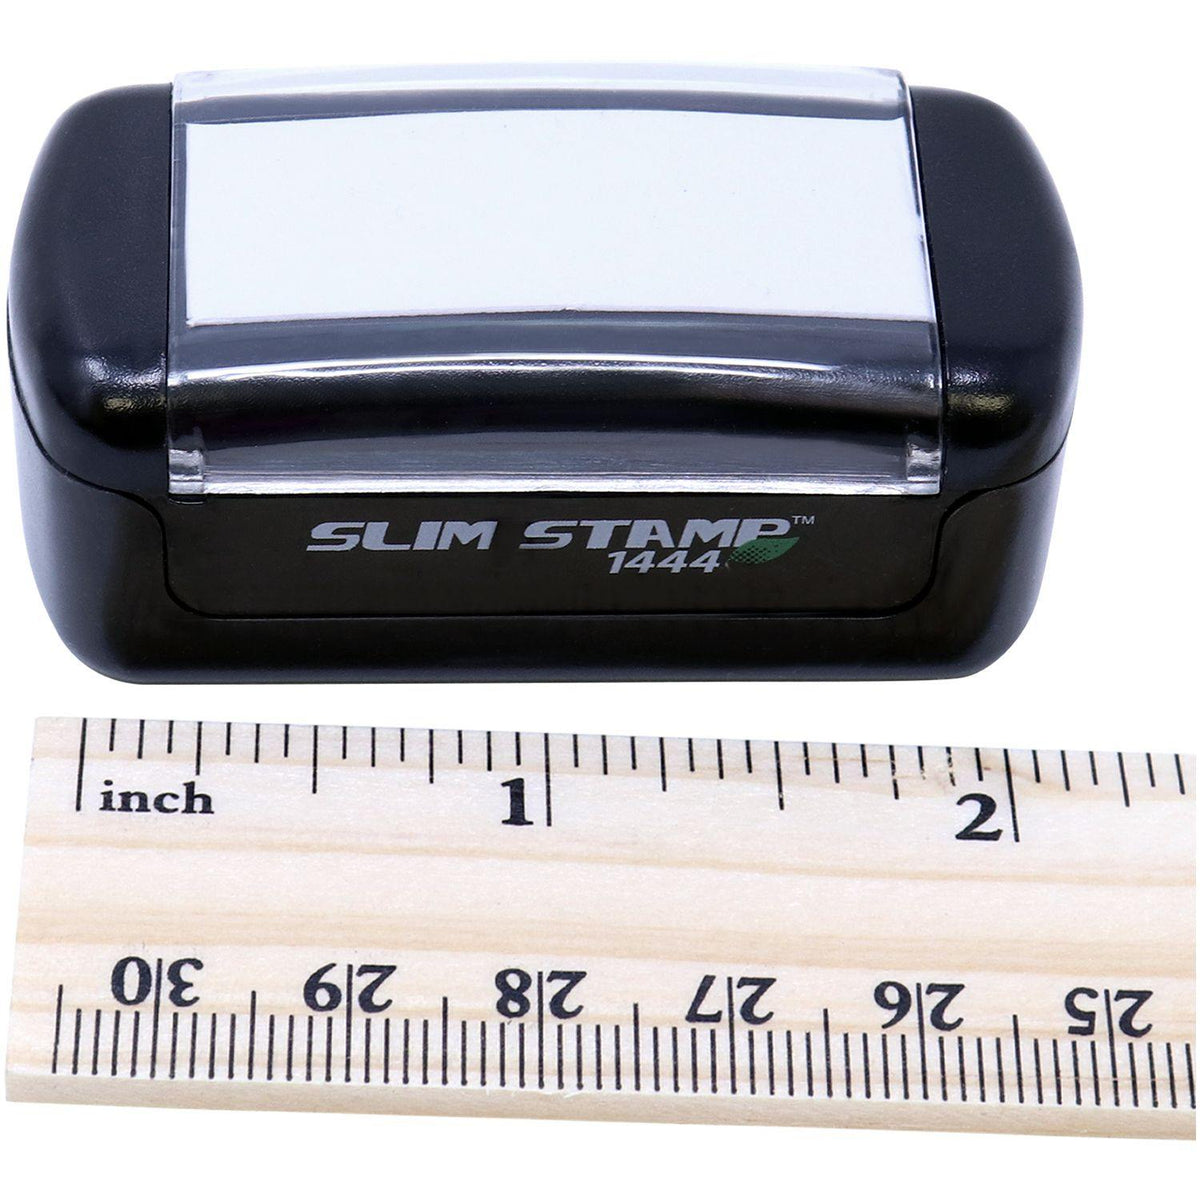 Measurement Slim Pre-Inked Signed with Date Stamp with Ruler